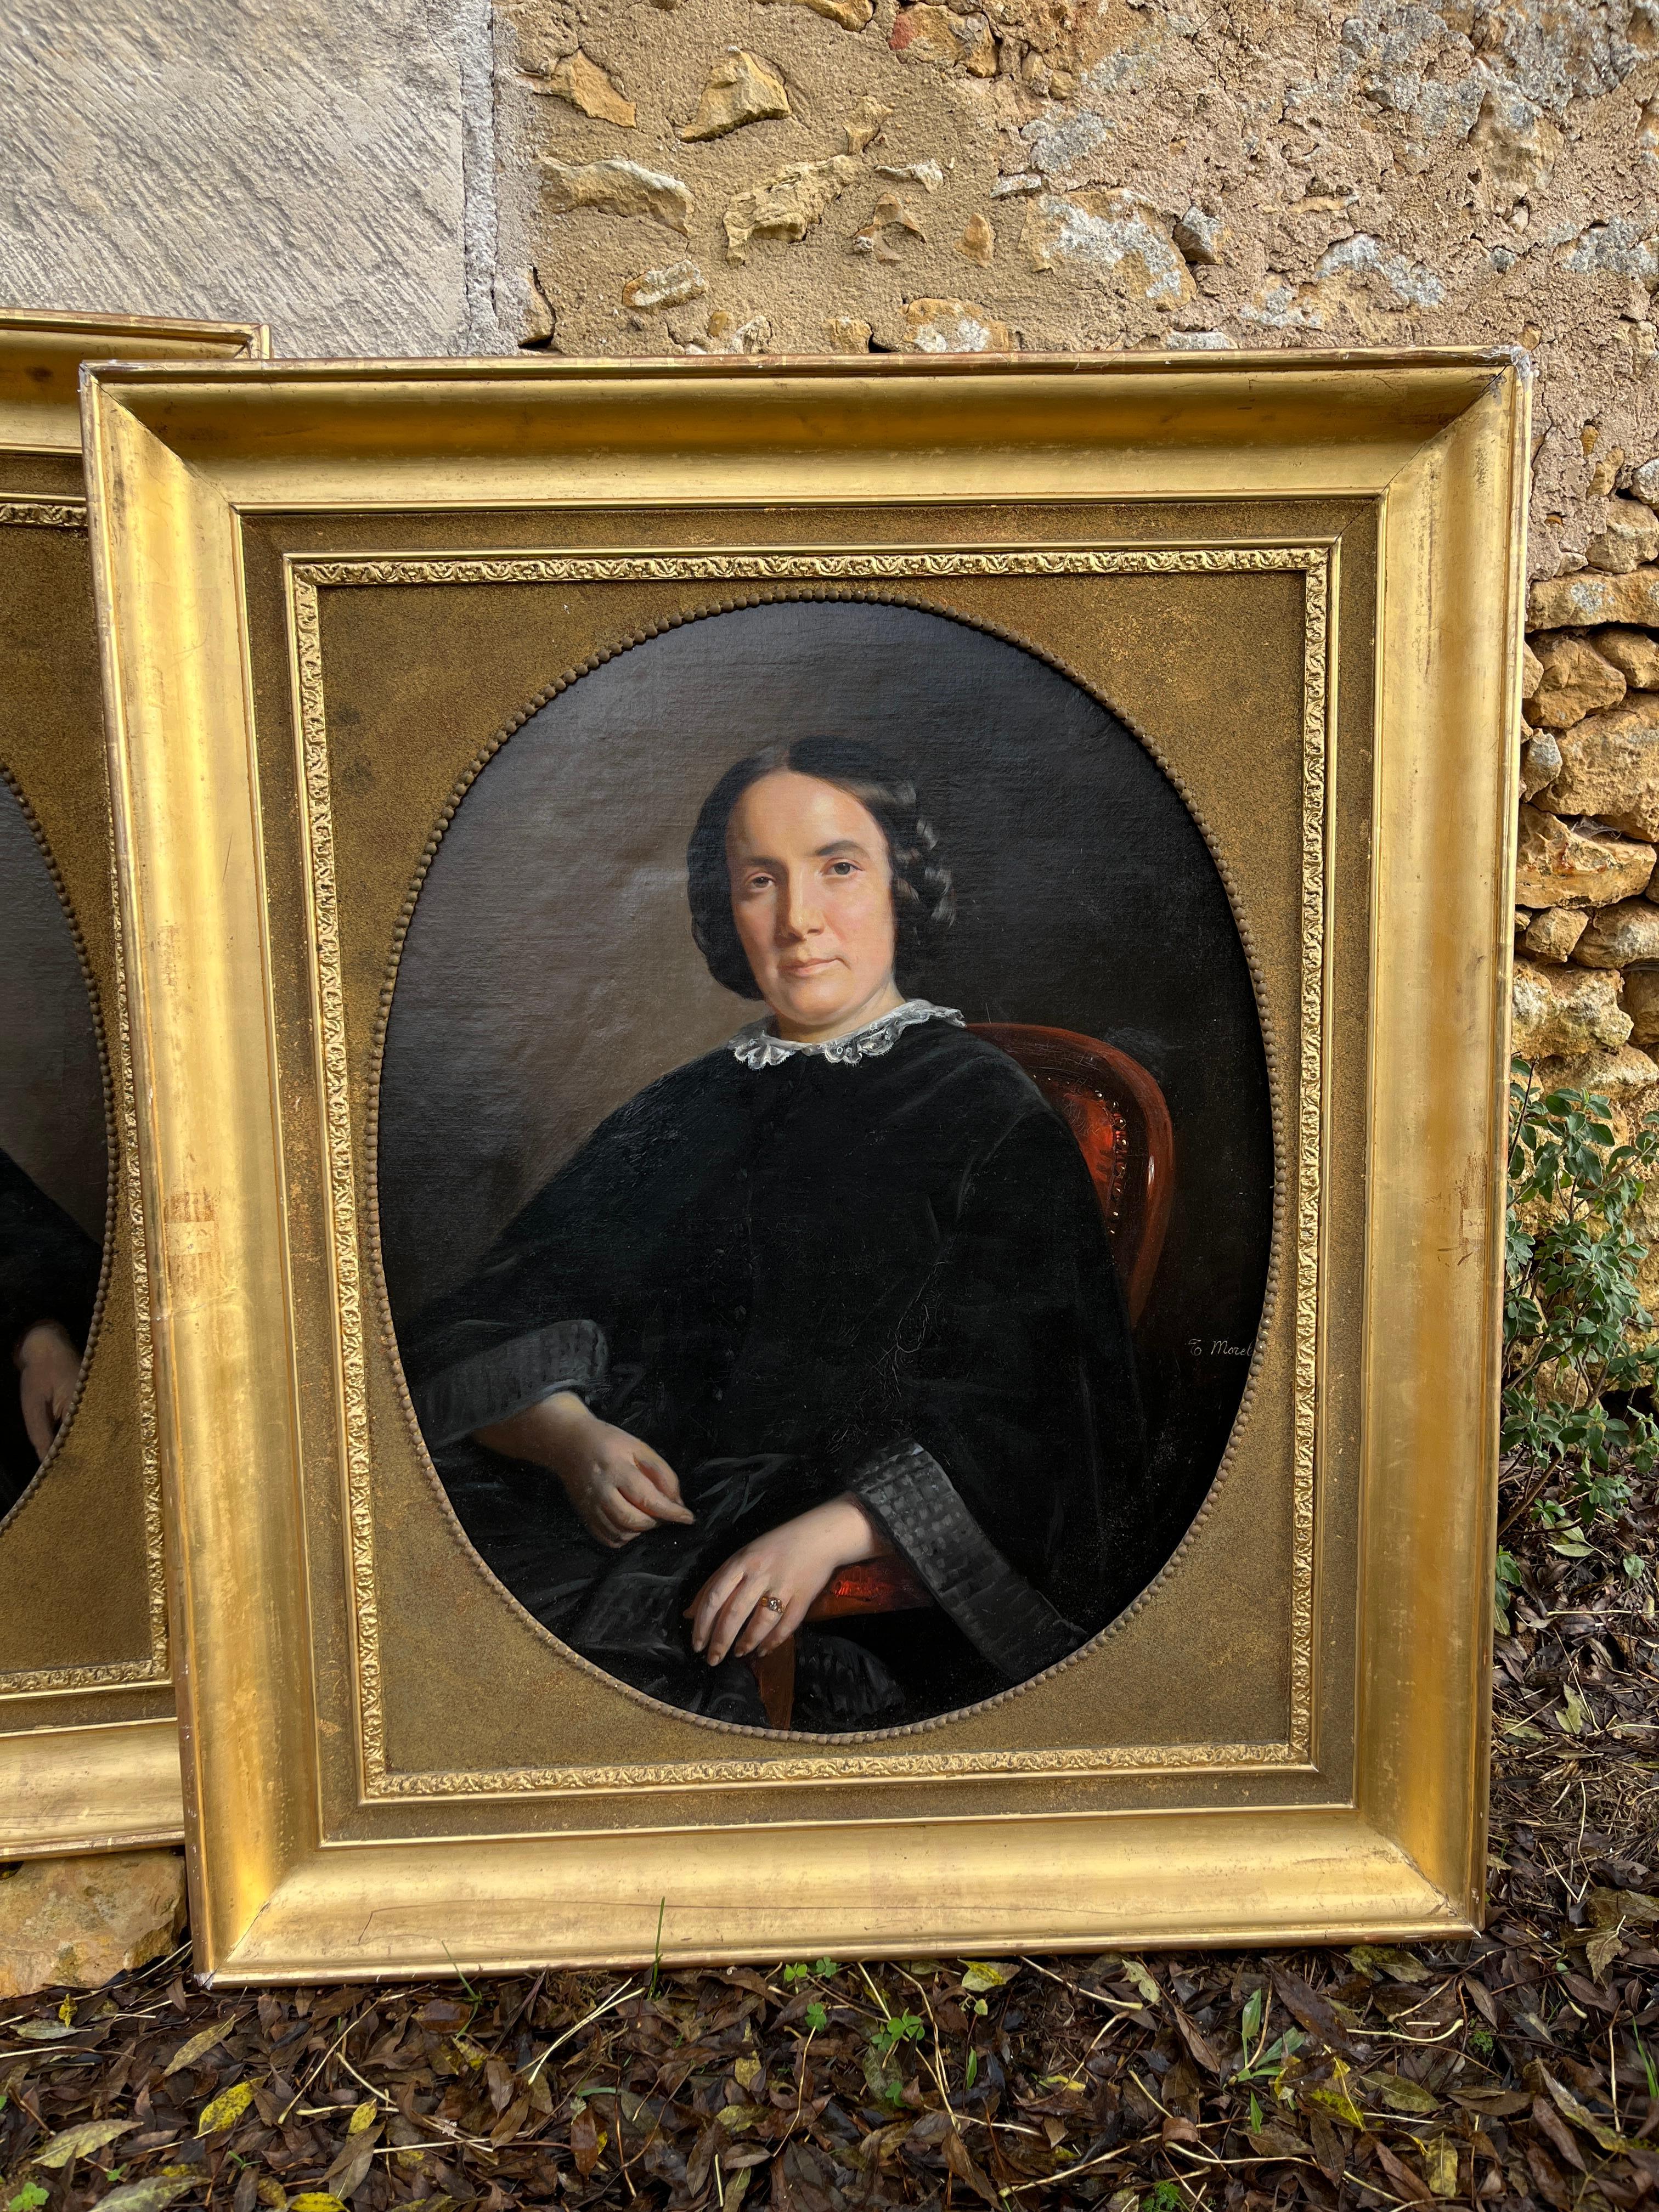 Suite of four large family portraits, kept together to this day. Created around 1840 by the painter Théophile Morel, who presented portraits at the Salon des Artistes Français from the start of the decade.

These works are in perfect condition,